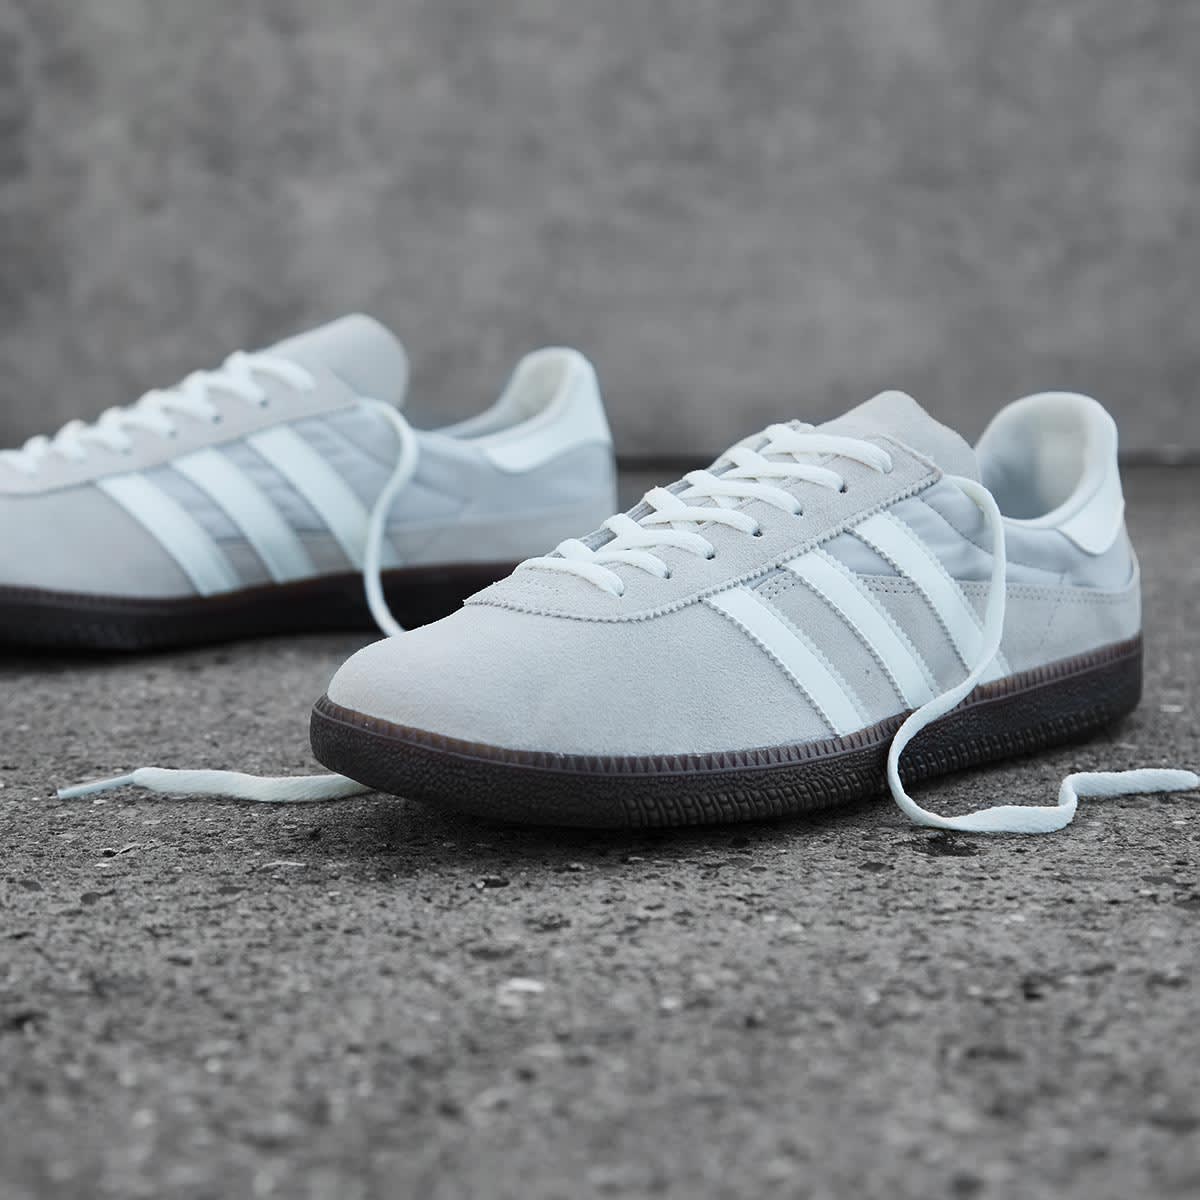 Adidas SPZL GT Wensley (Clear Brown & Off White) | END. Launches